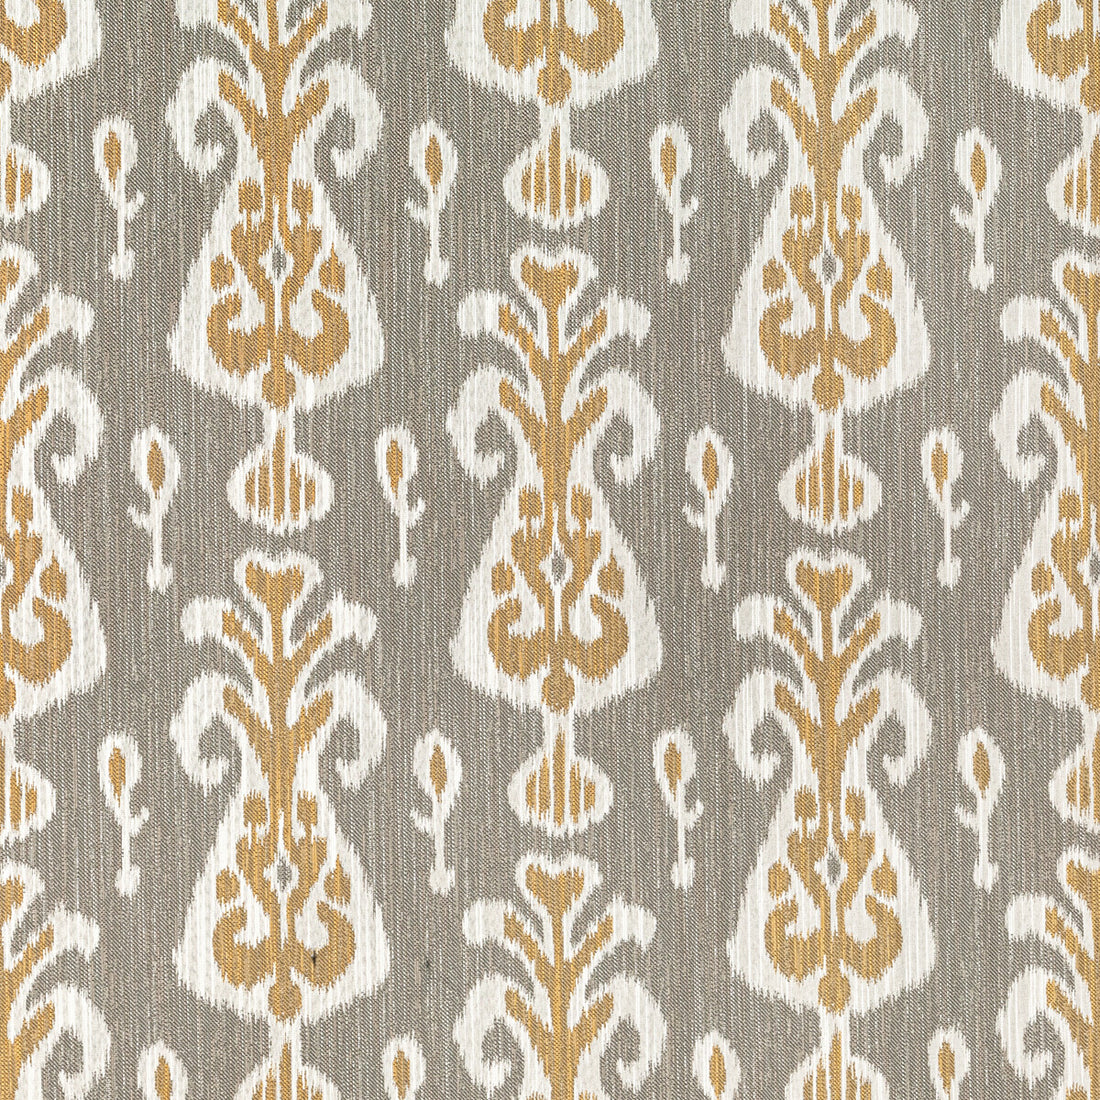 Kravet Design fabric in 36760-411 color - pattern 36760.411.0 - by Kravet Design in the Woven Colors collection